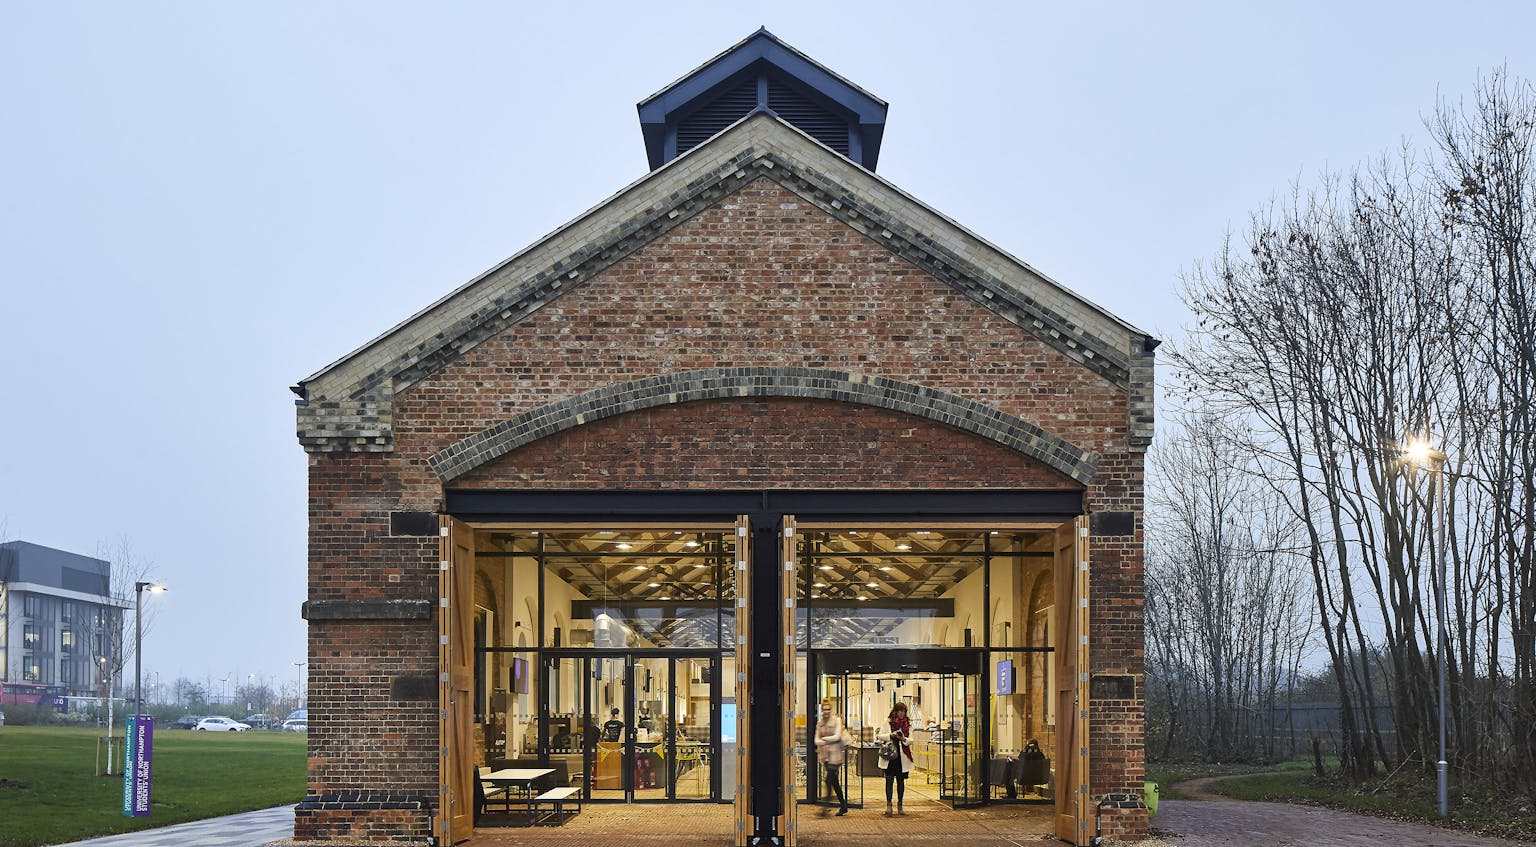 Brick Victorian engine shed converted into glass fronted contemporary hub